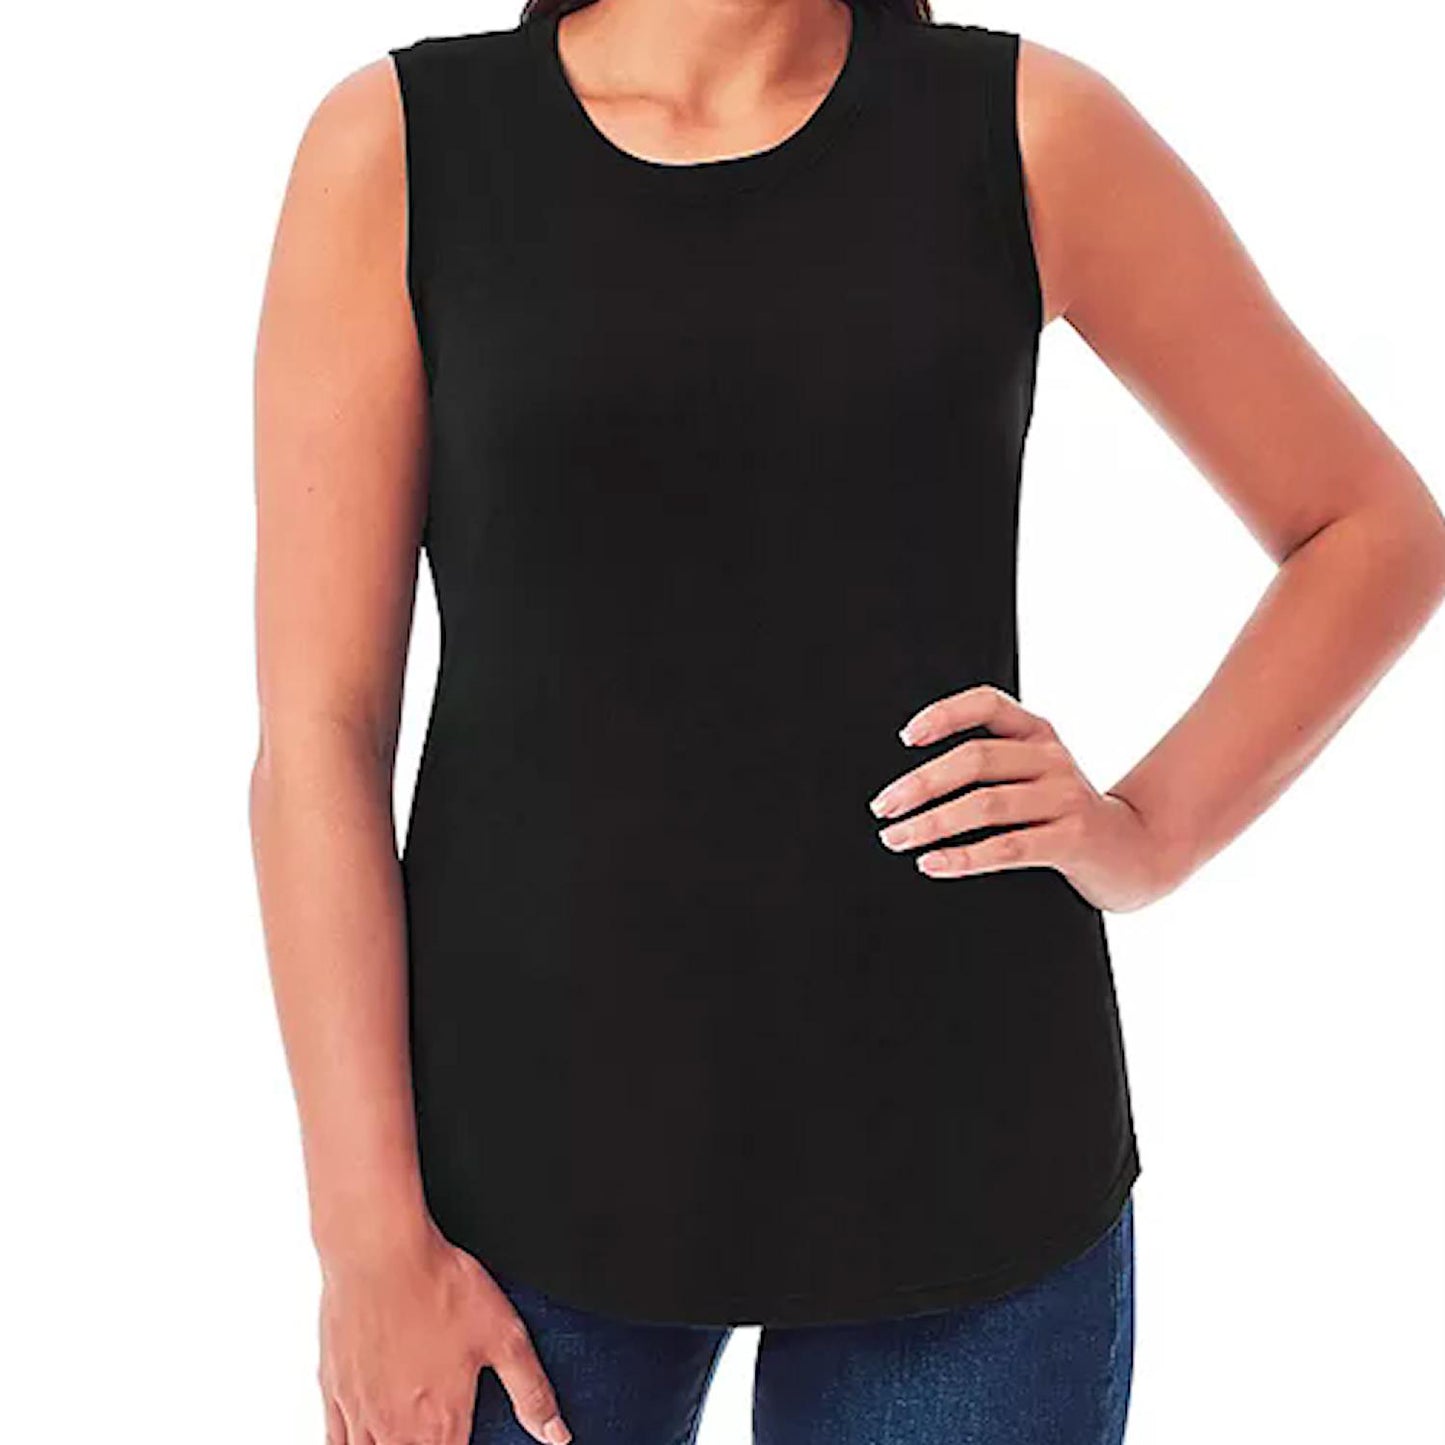 Member's Mark Women's Relaxed Fit Pima Cotton & Modal Essential Tank Top